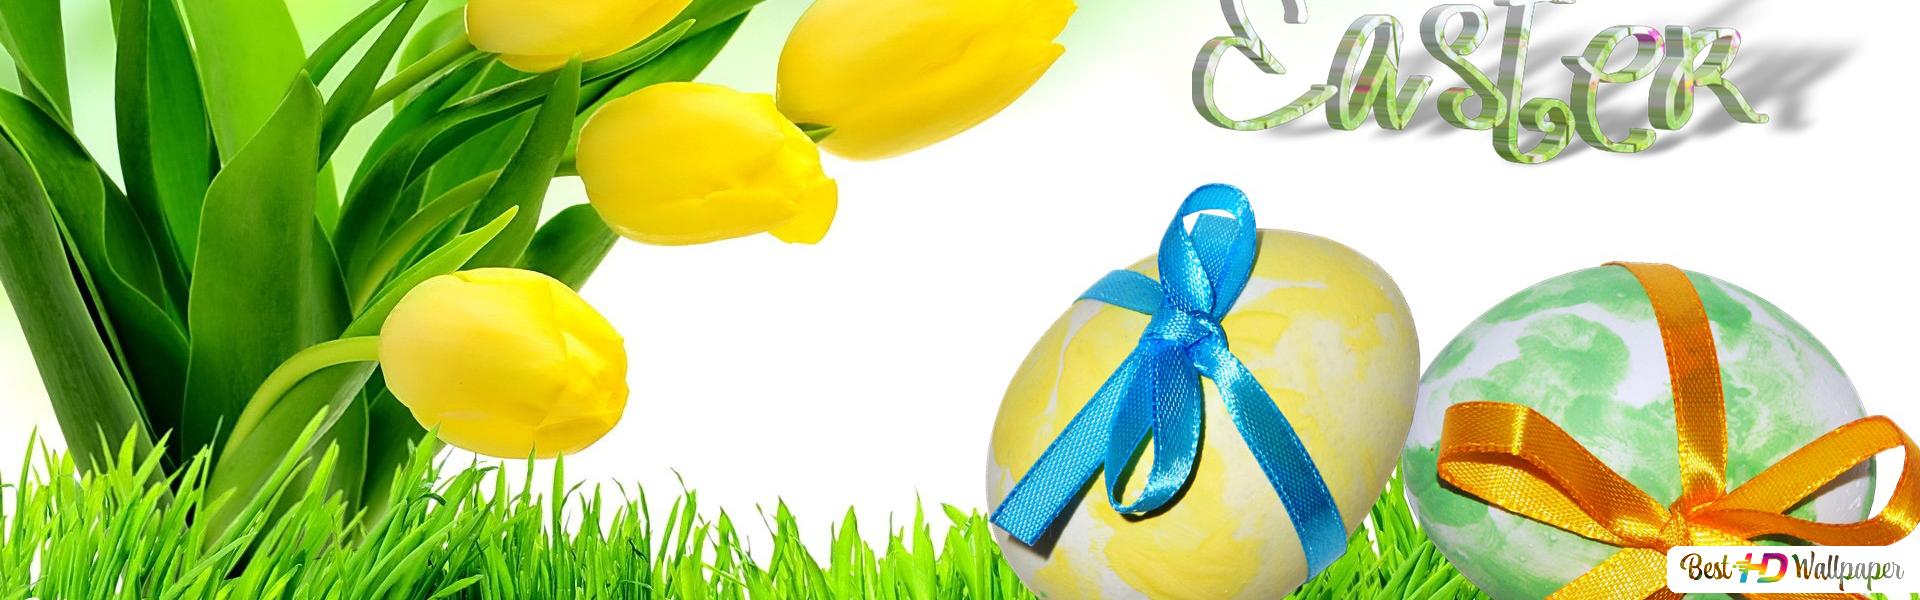 Happy Easter Note HD wallpaper download